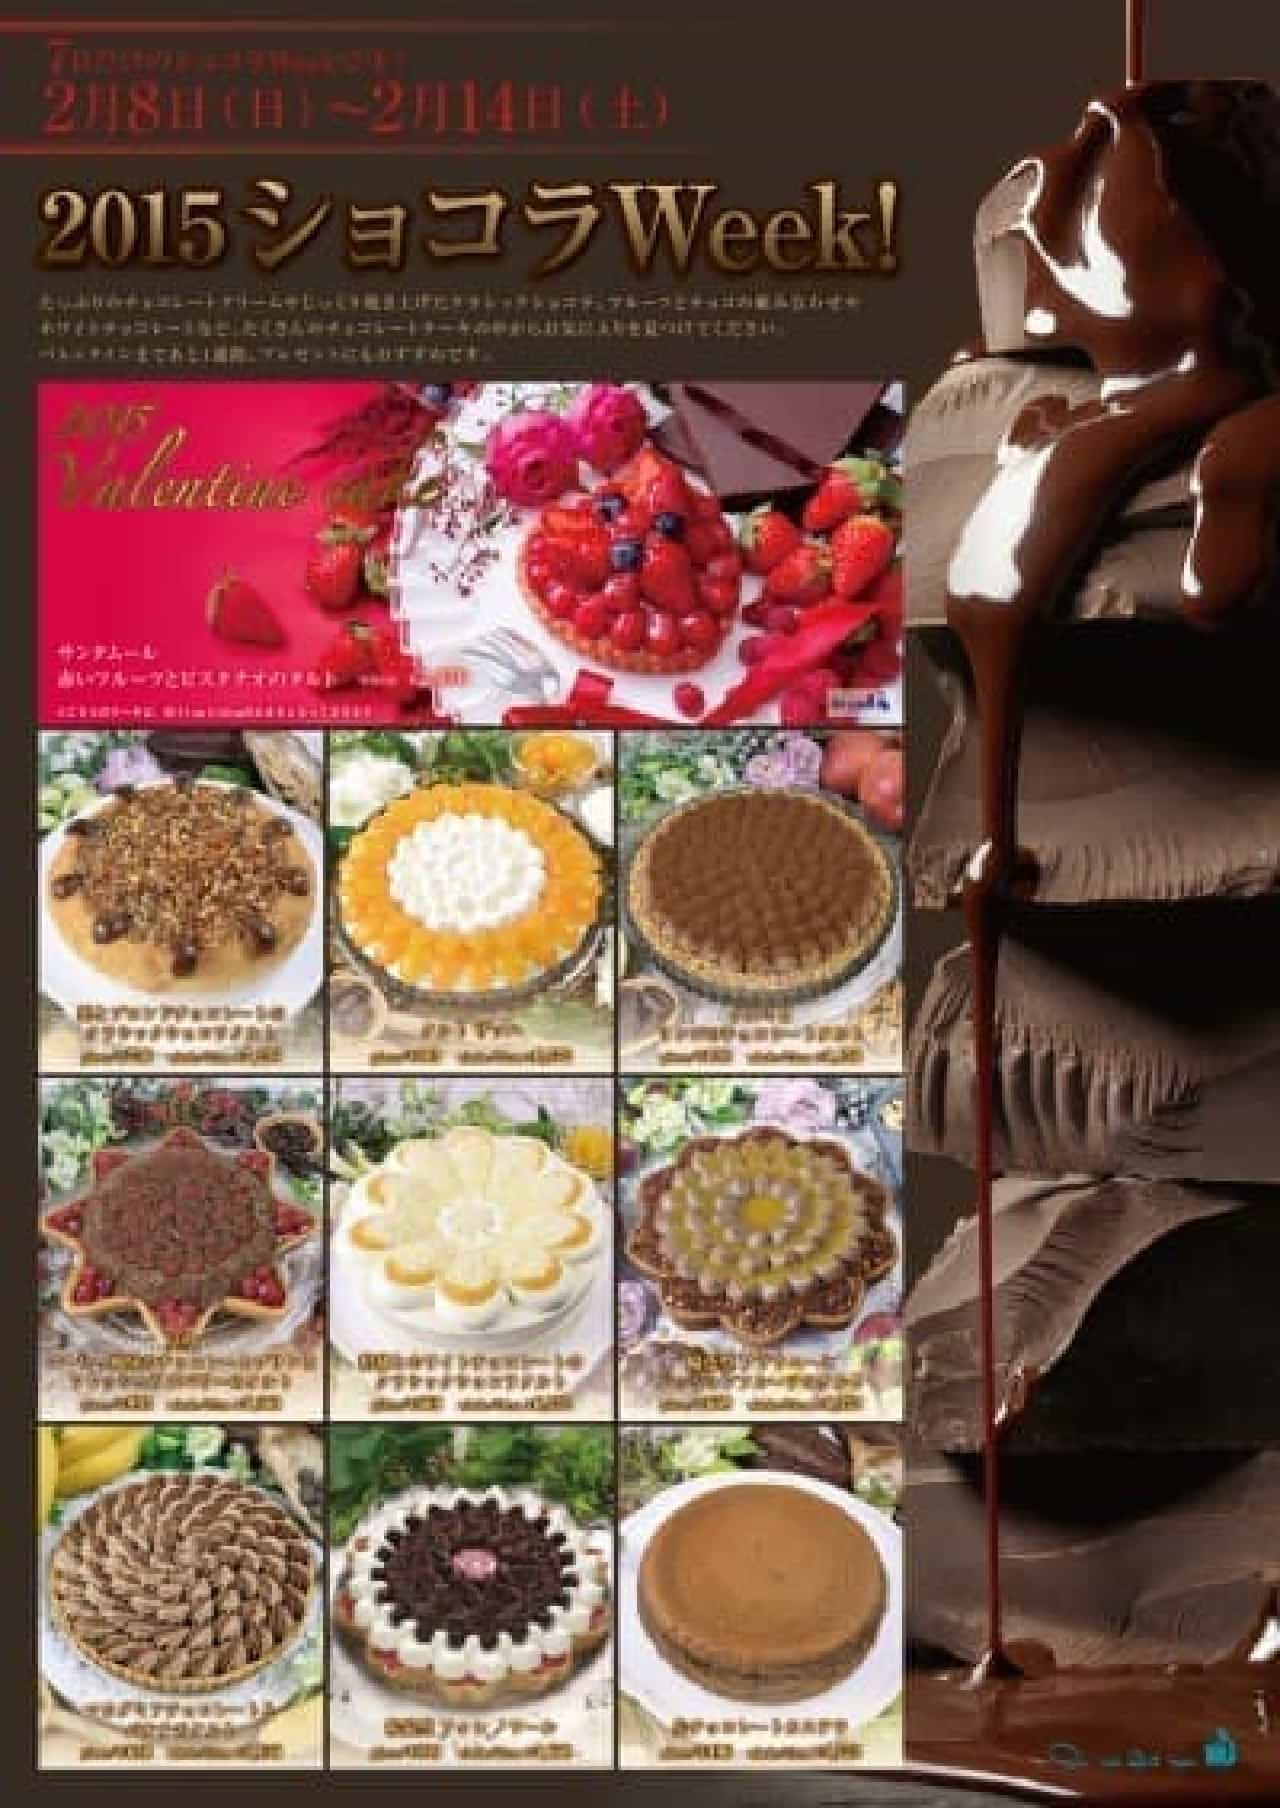 Only 7 days in a year! "2015 Chocolat Week!"